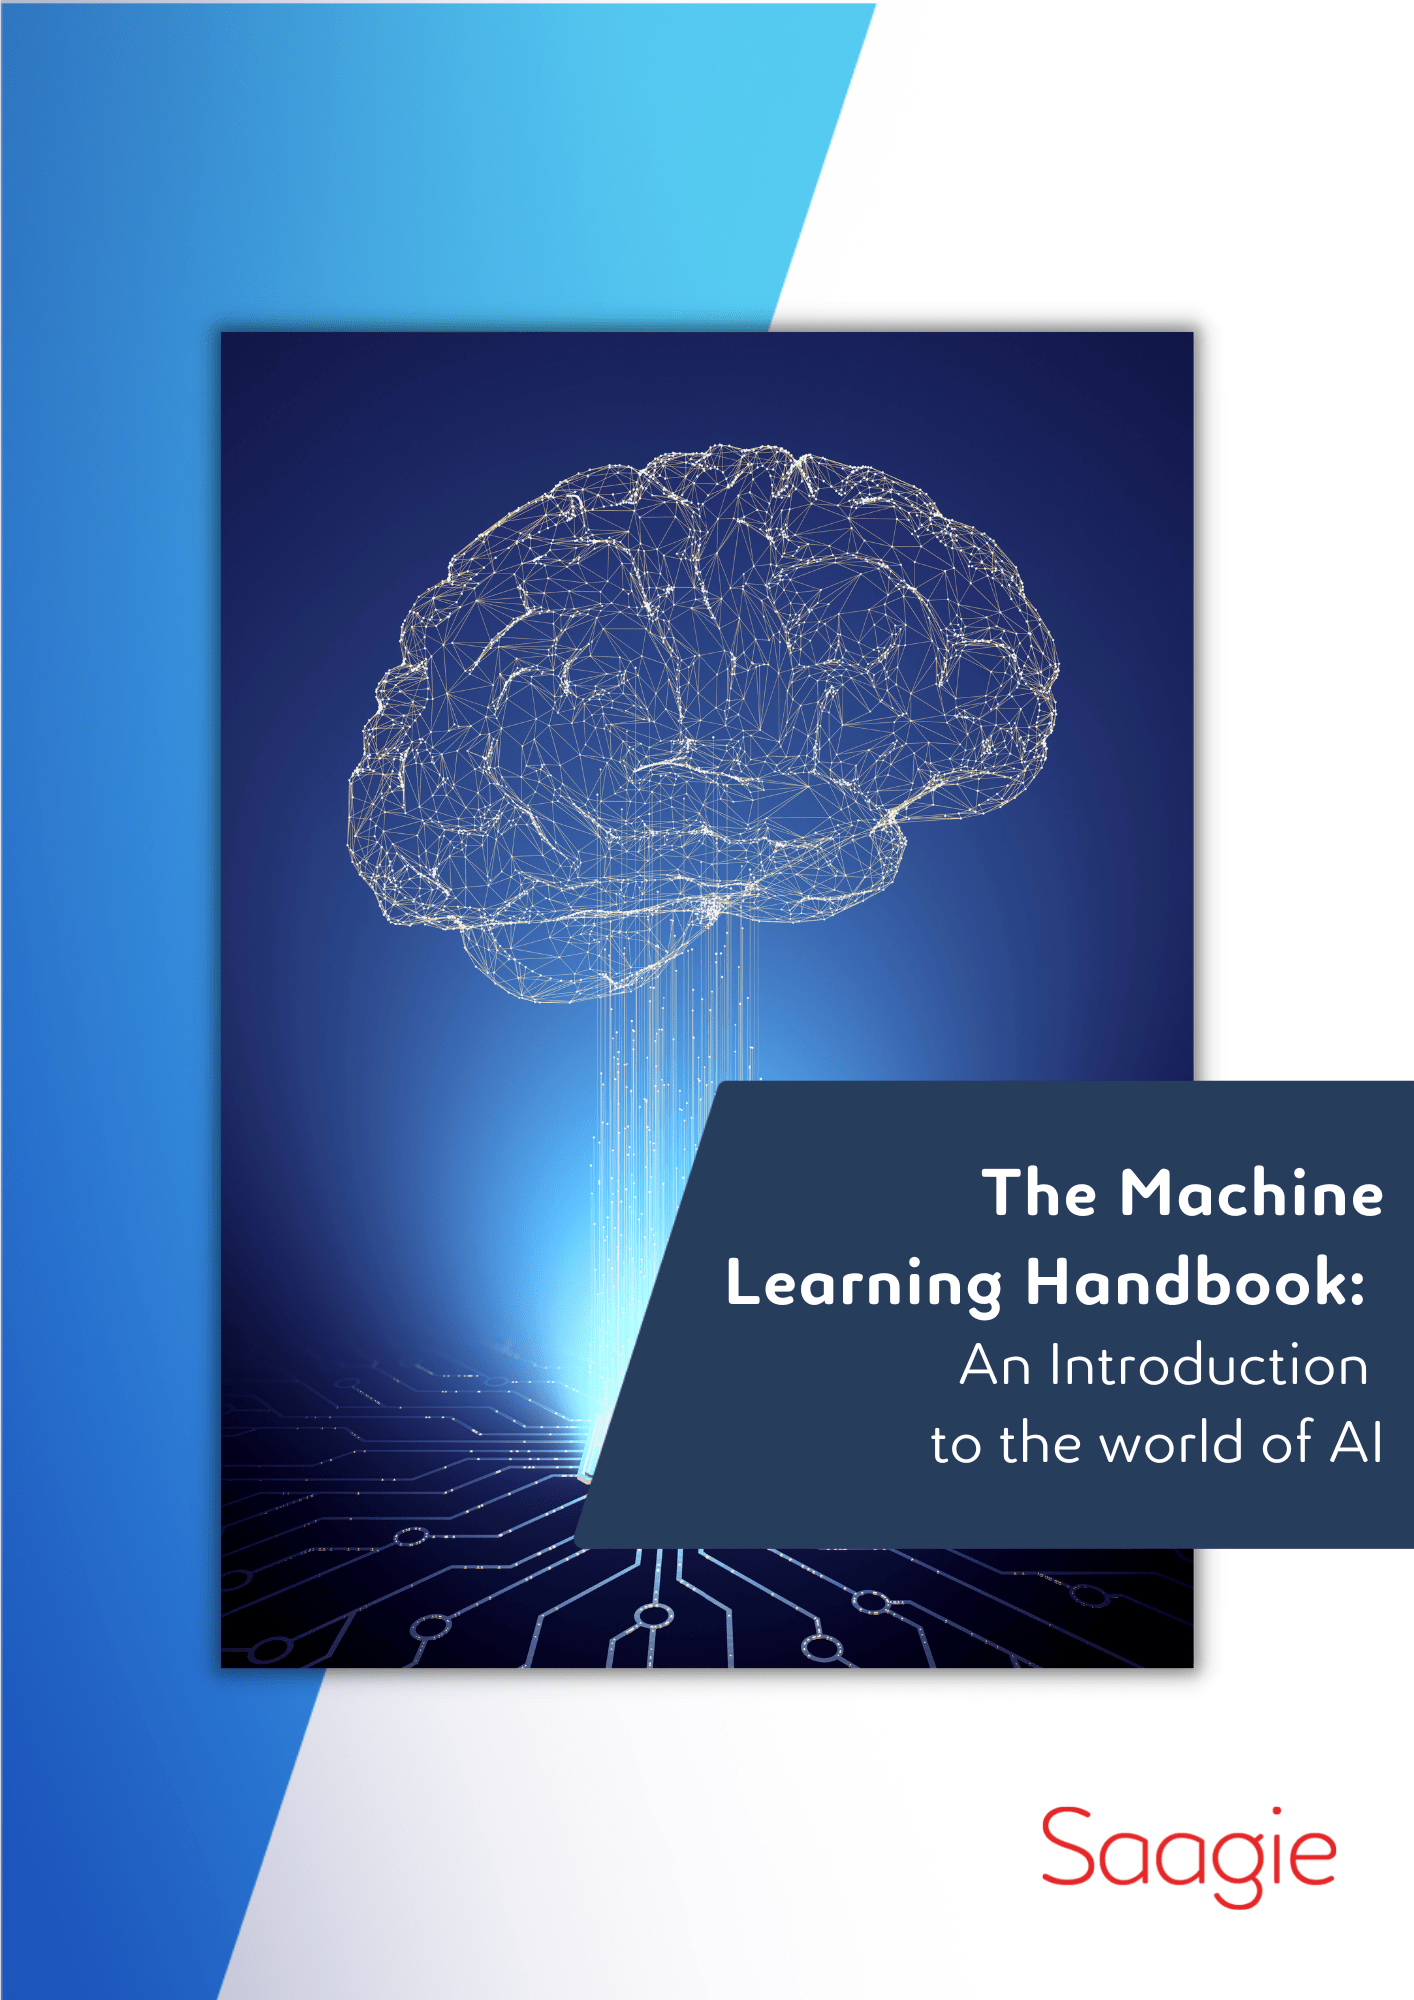 The Machine Learning Handbook : introduction to AI